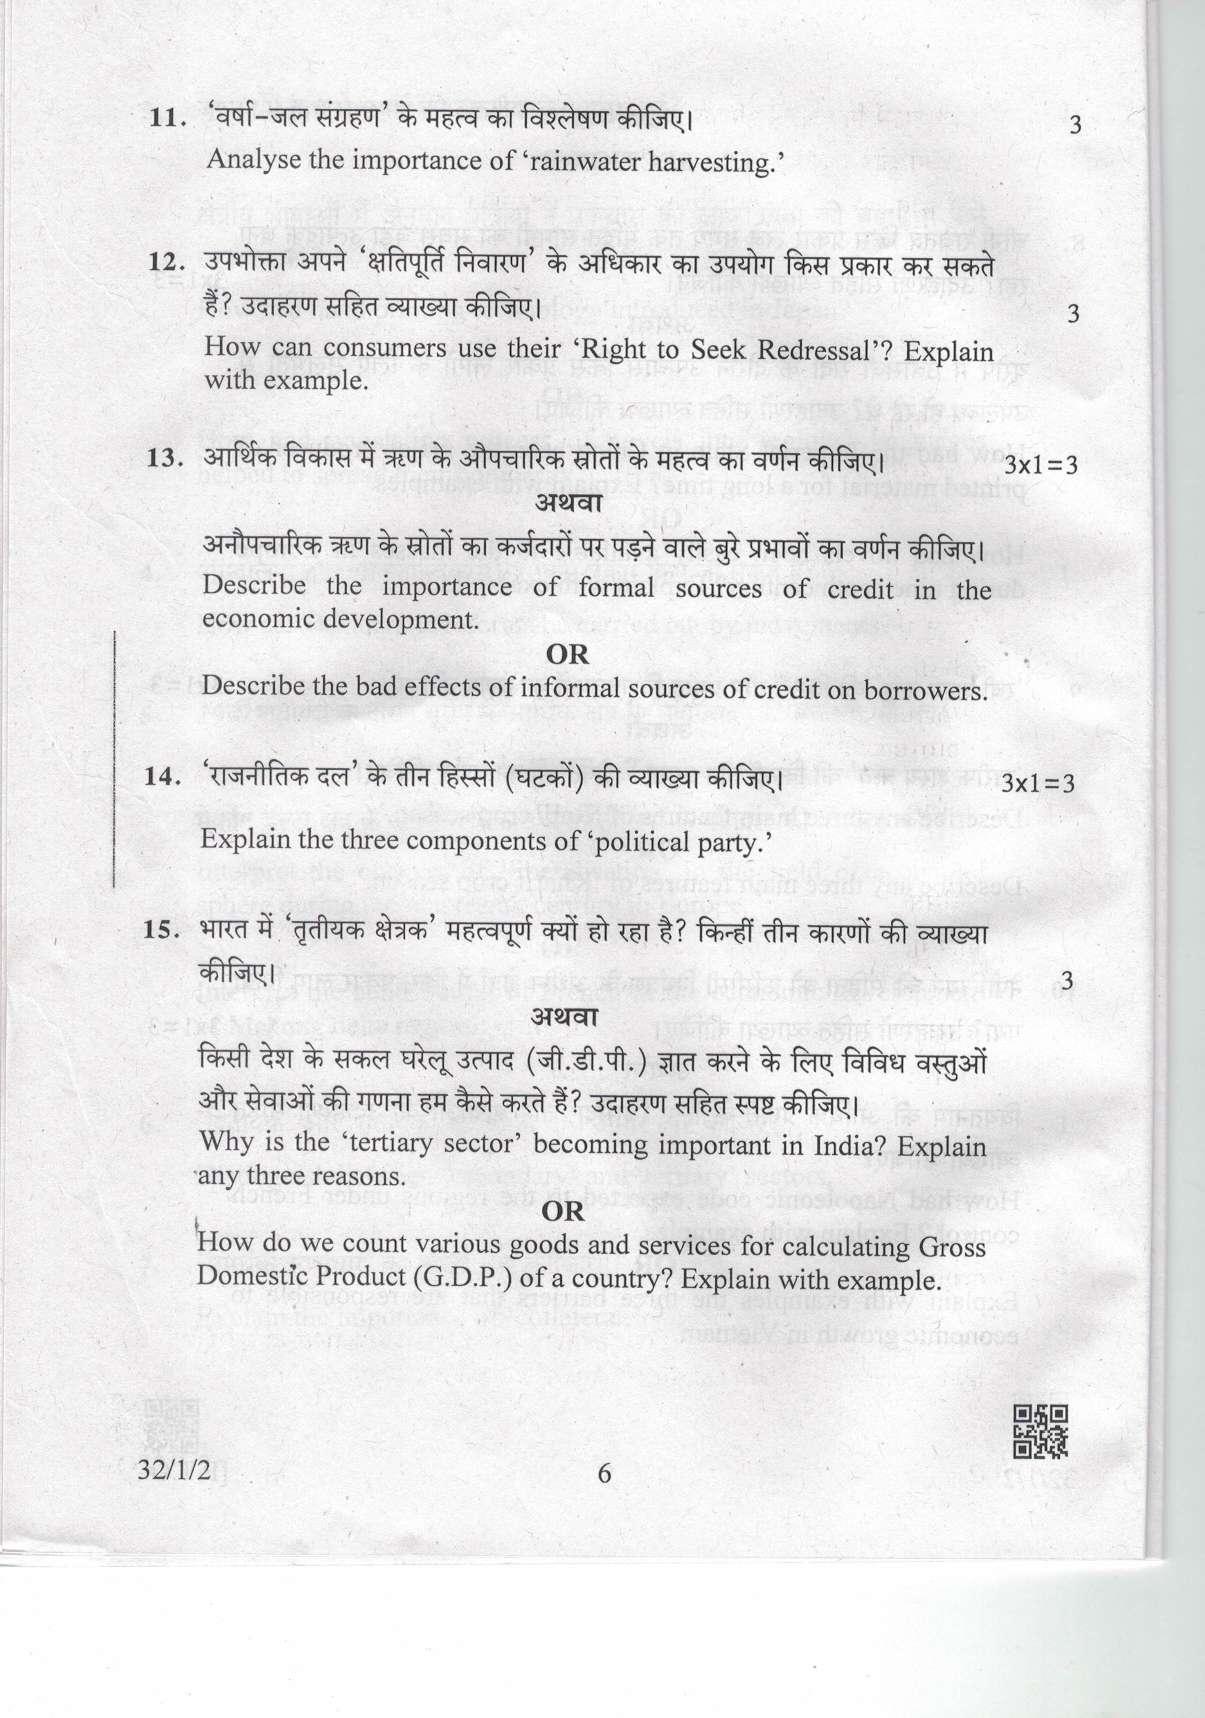 CBSE Class 10 32-1-2 Social Science 2019 Question Paper - Page 6